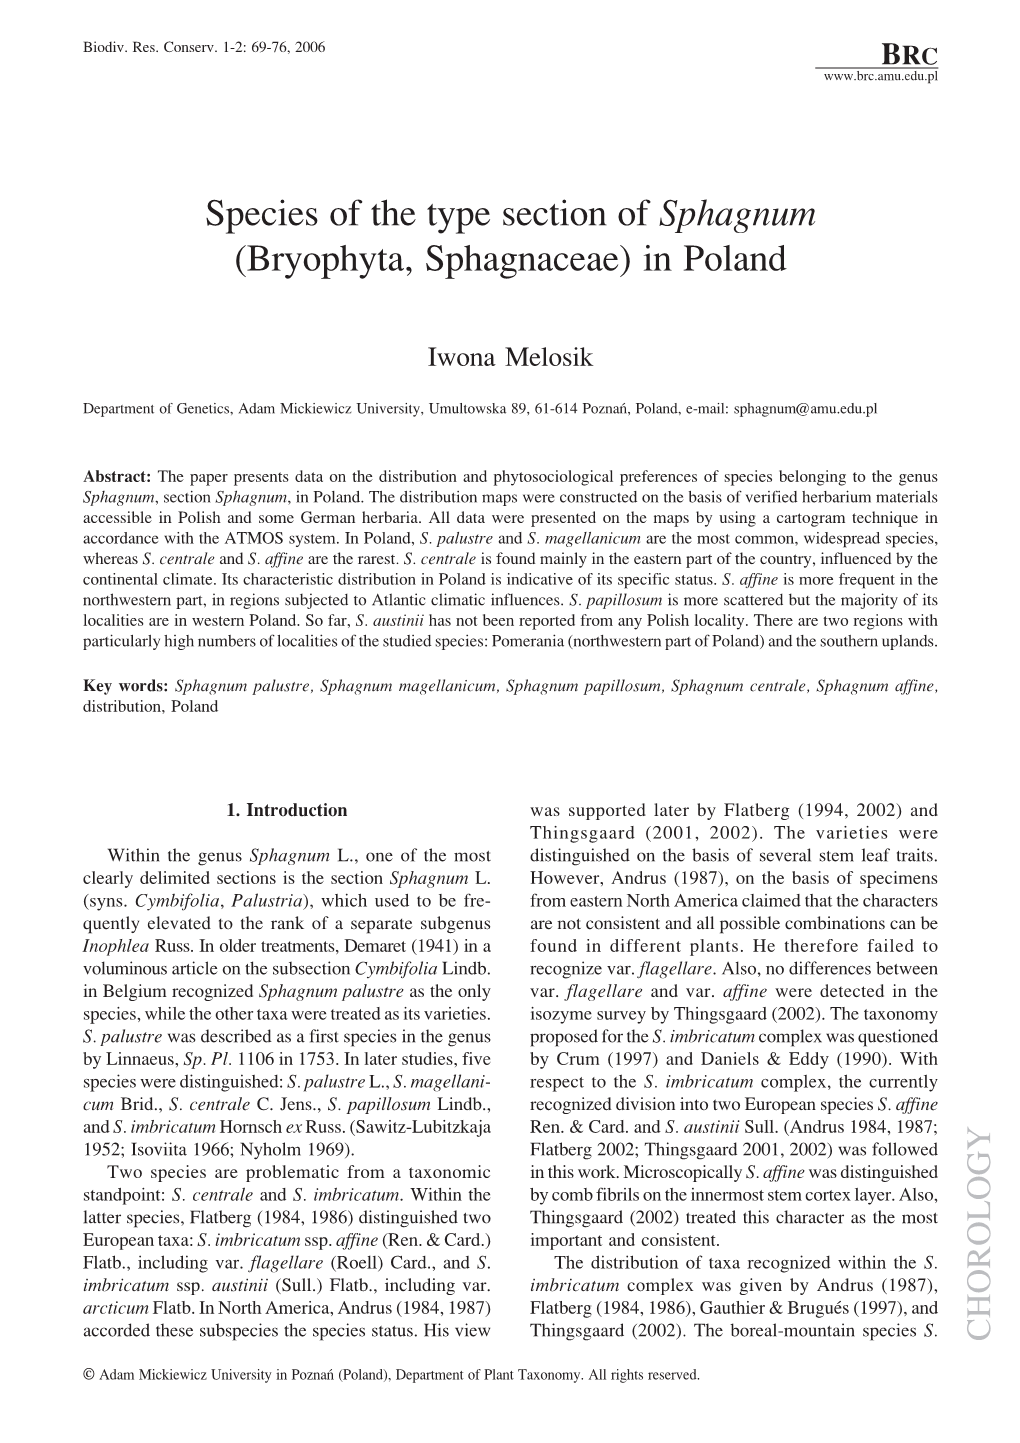 Species of the Type Section of Sphagnum (Bryophyta, Sphagnaceae) in Poland